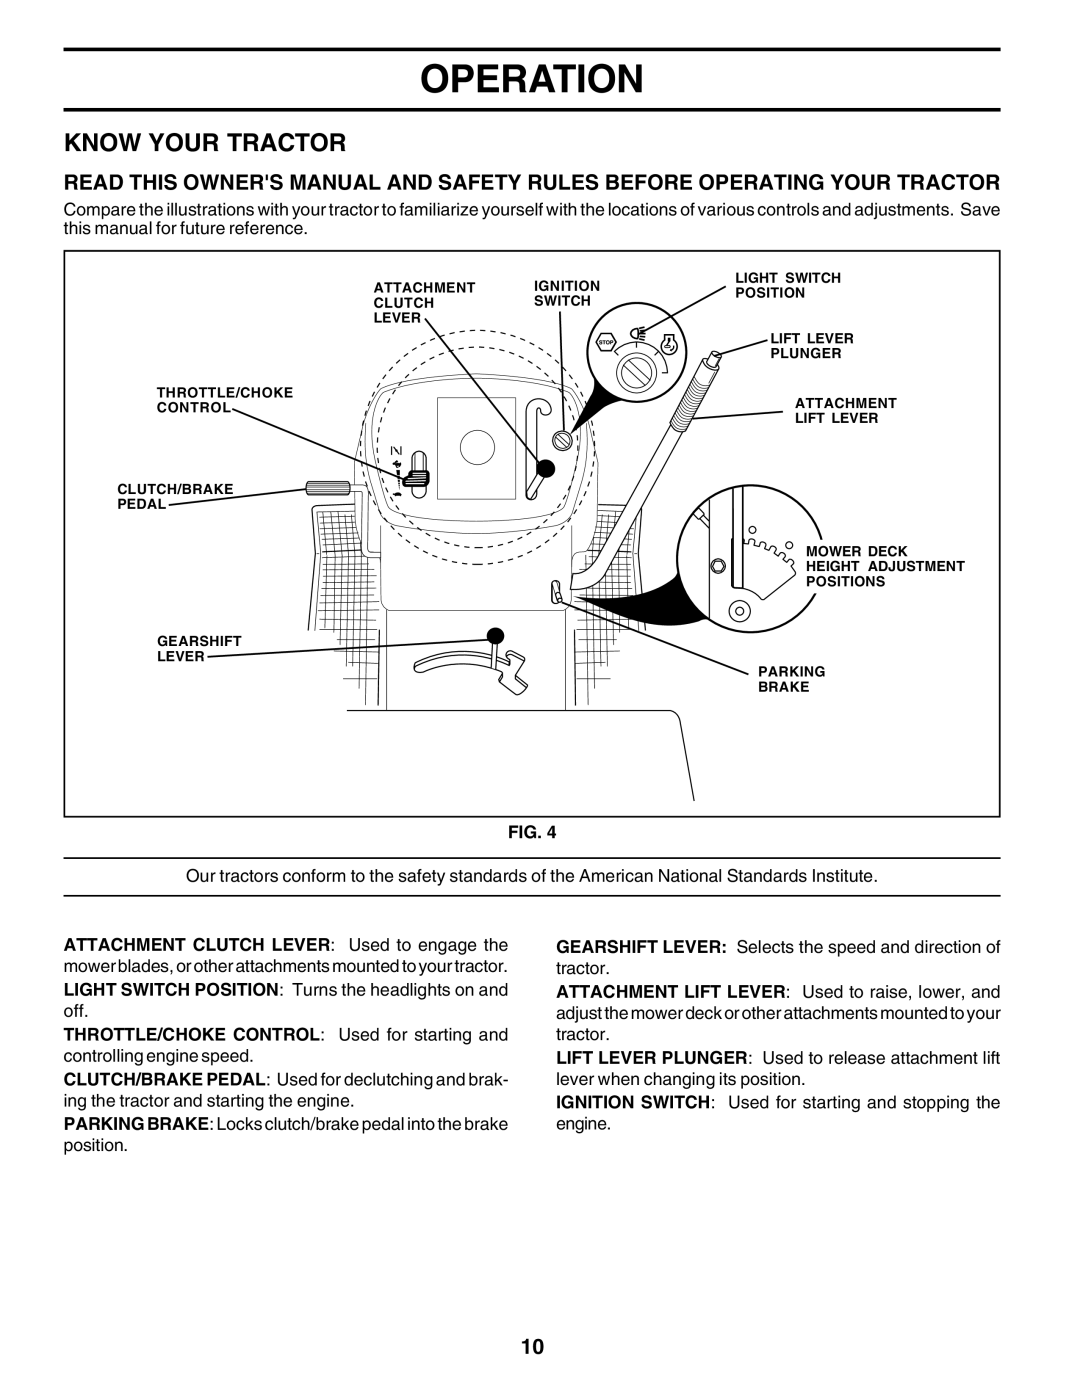 Poulan PO1538B manual Know Your Tractor, Operation 